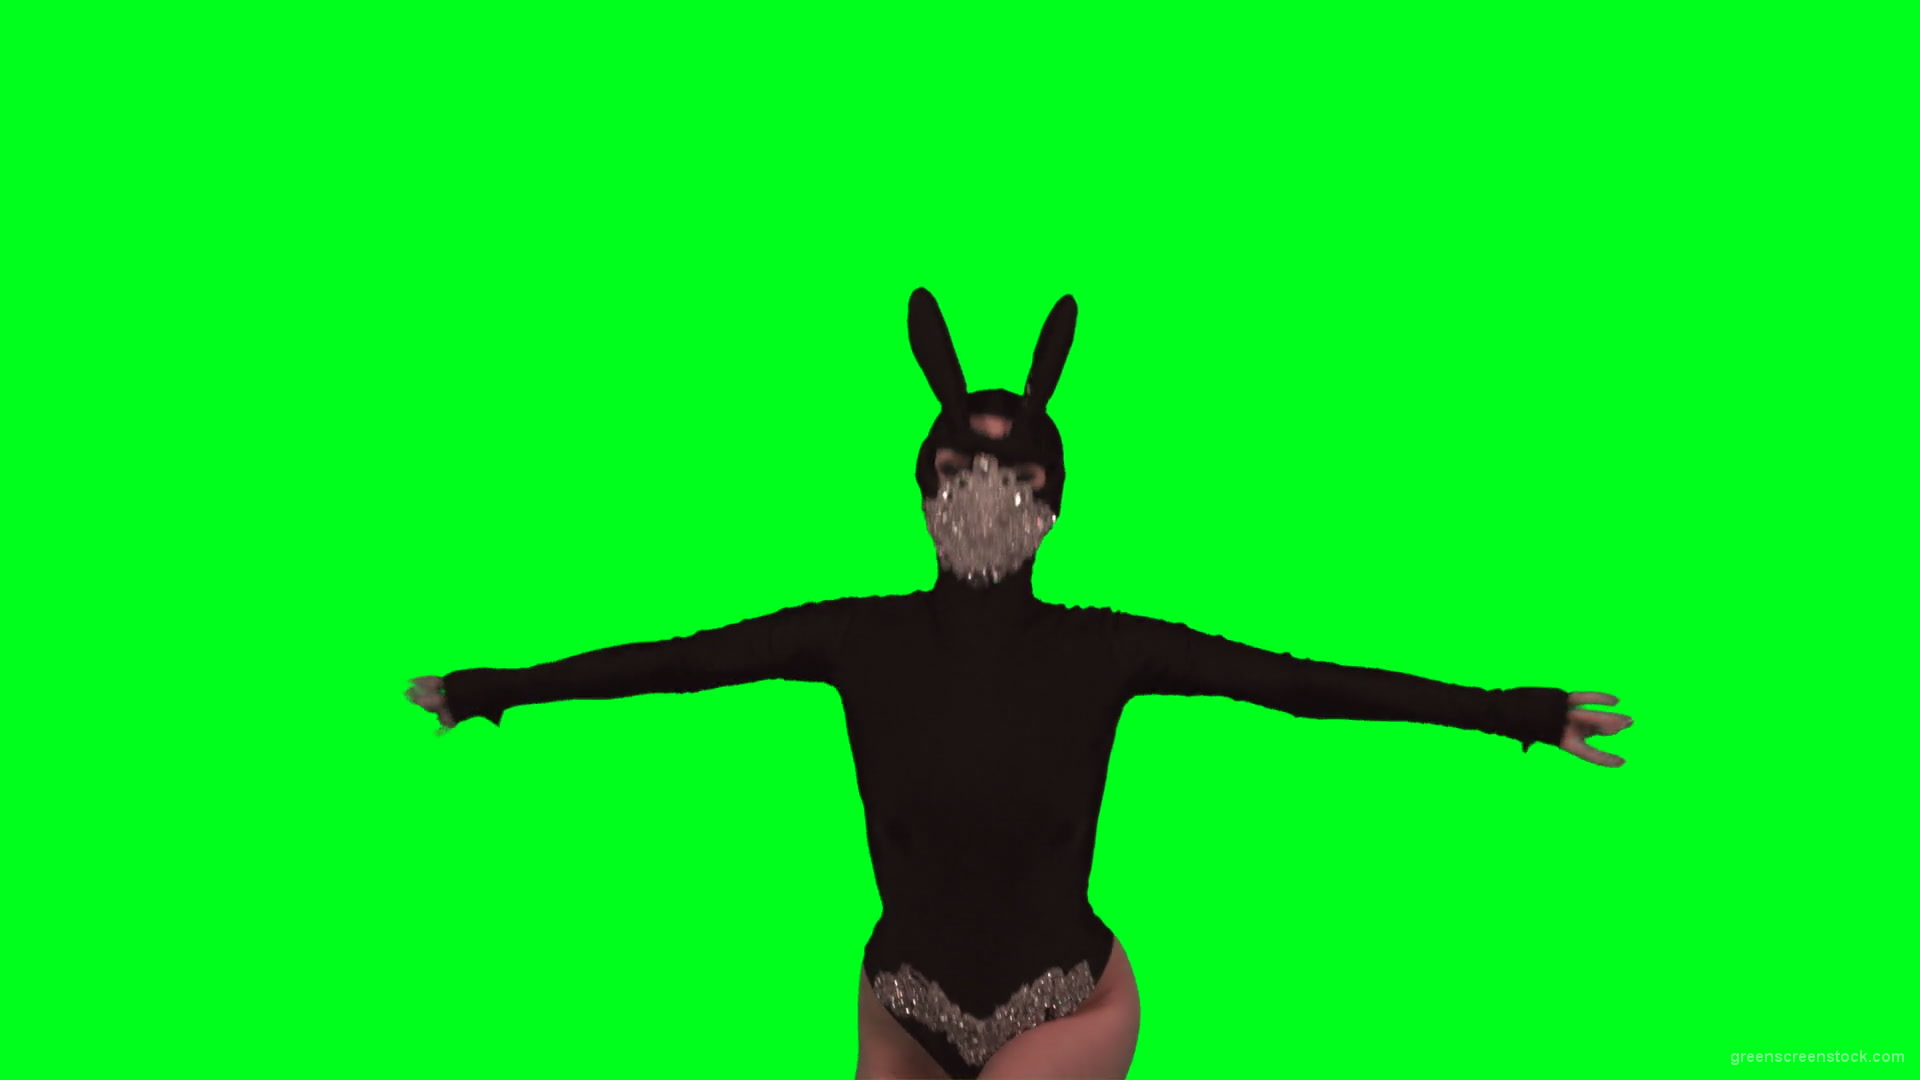 Rave-Calling-EDM-Go-Go-Dancing-Girl-performs-on-green-screen-4K-Video-Footage-1920_006 Green Screen Stock